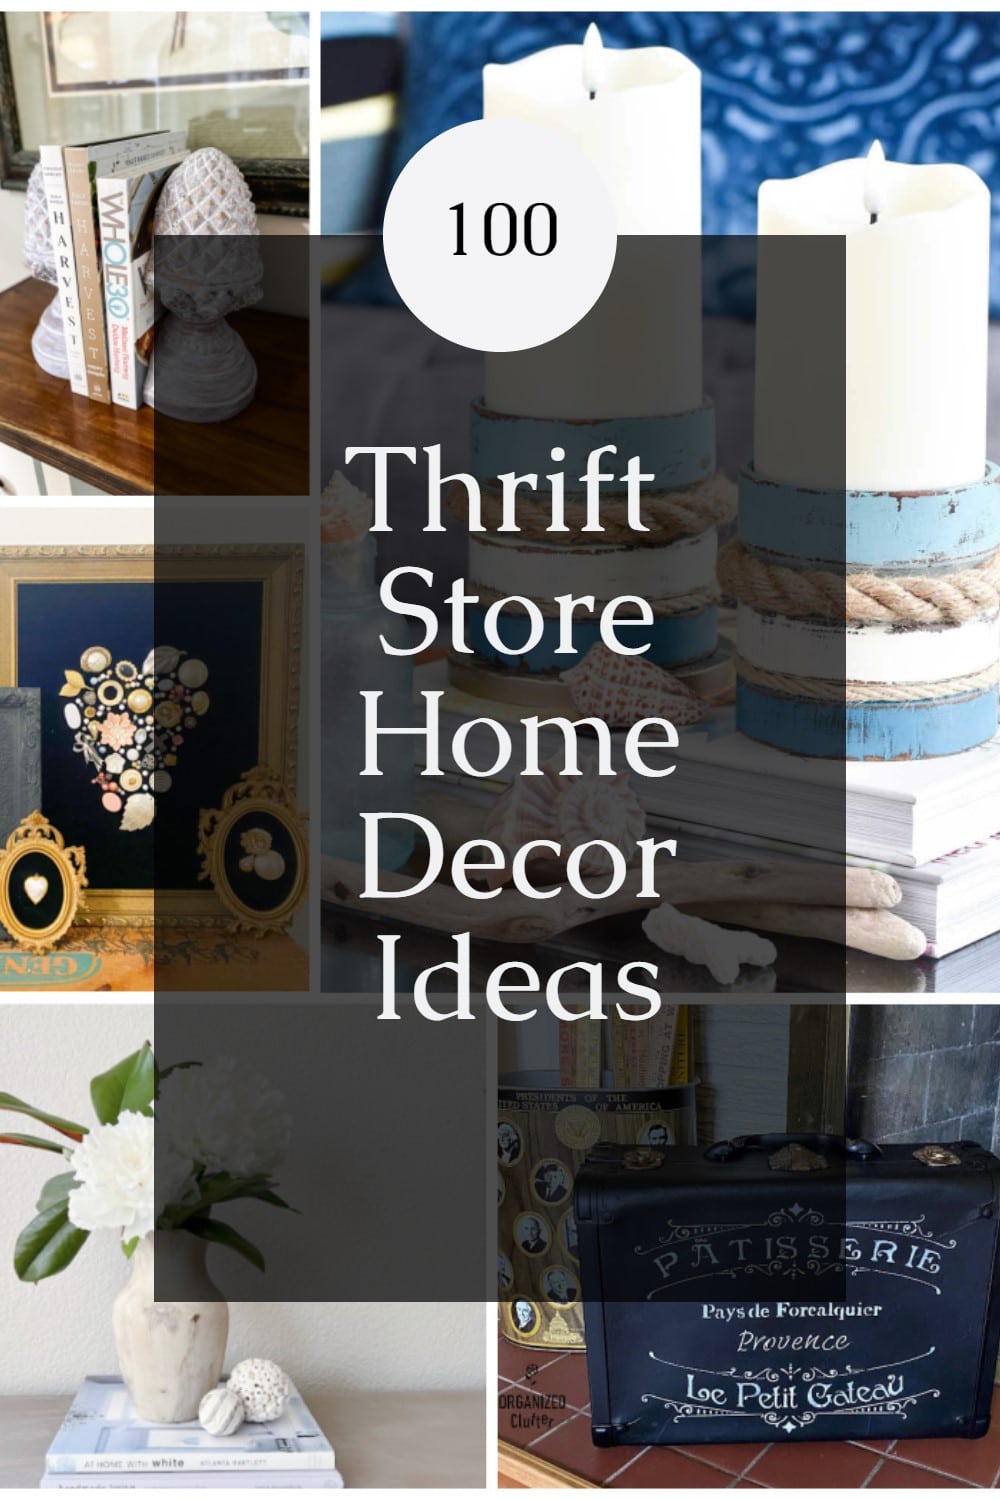 Our favorite thrift store projects from last year. Over 100 projects to inspire you including garden ideas, home decor and furniture. via @repurposedlife